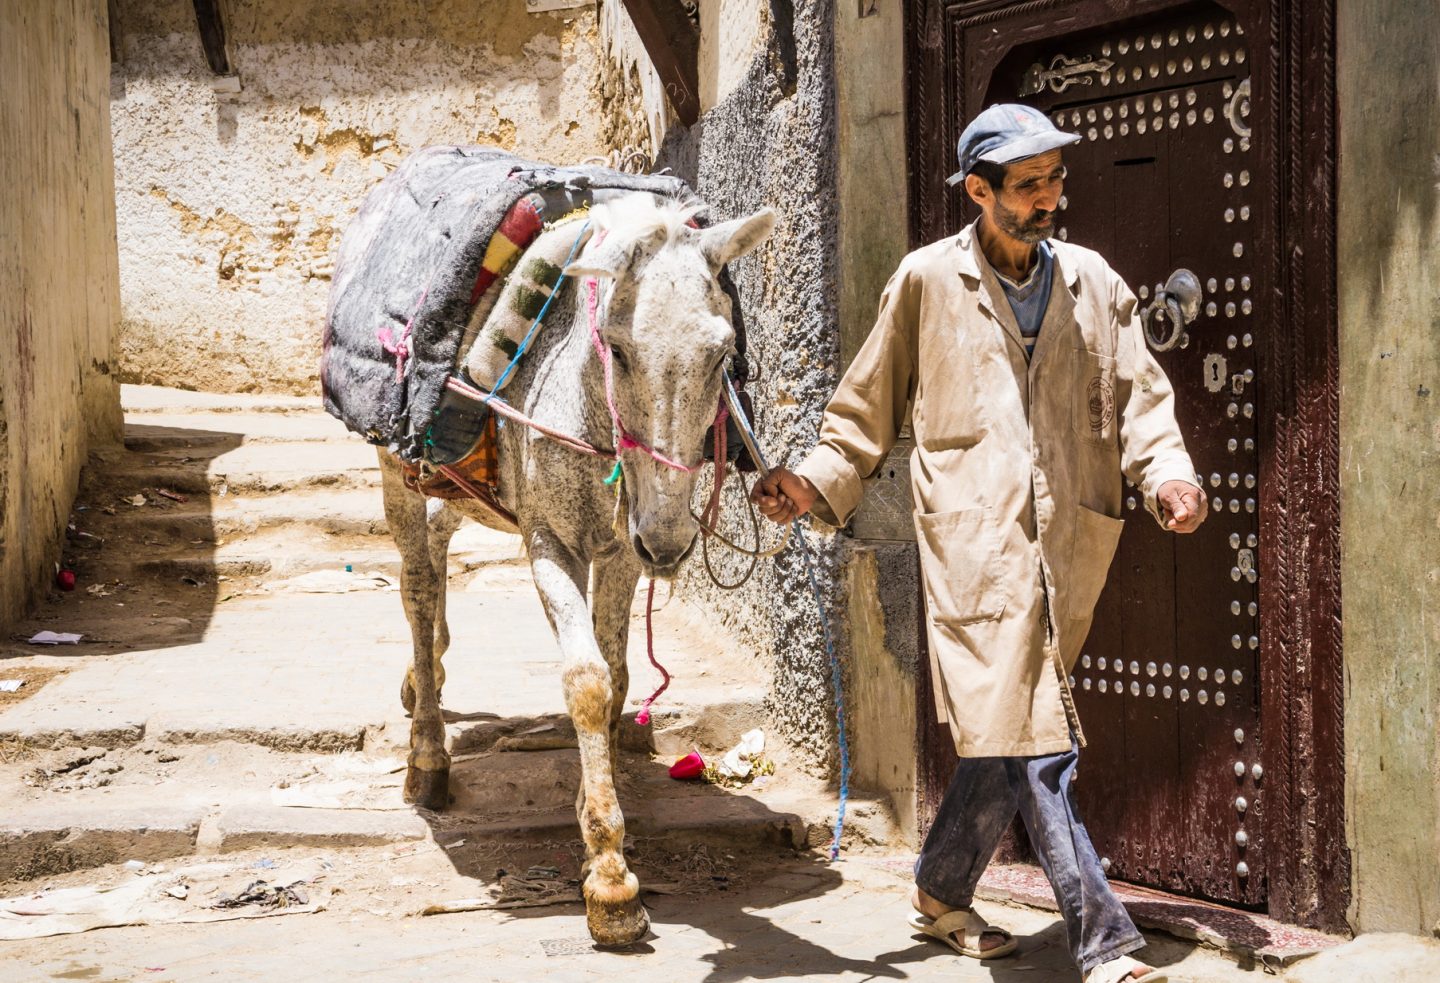 A man and his donkey in the narrow streets of the old medina of Fez in Morocco.